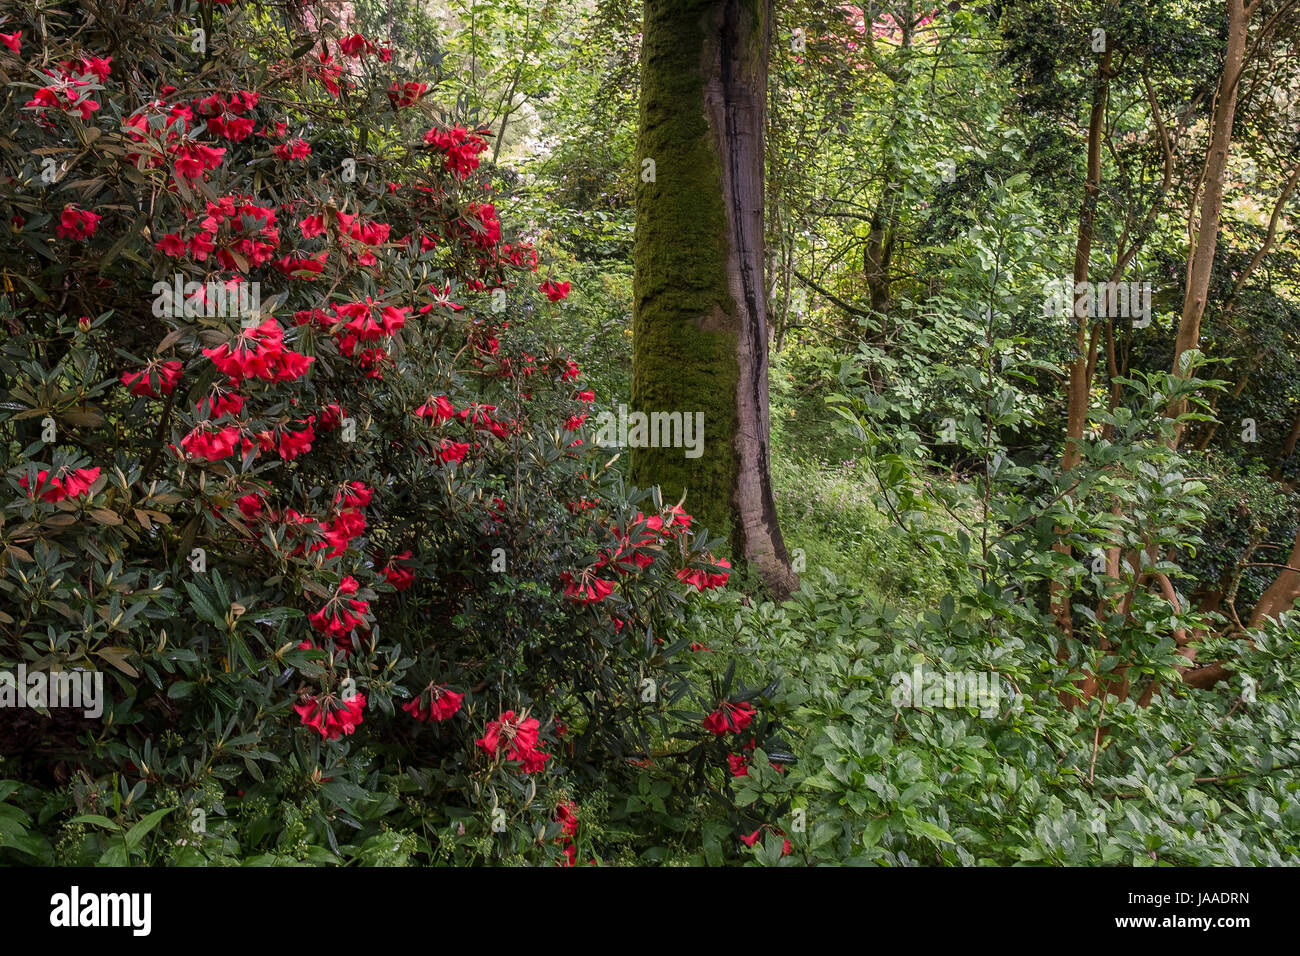 The flowers of a Rhododendron elegantum plant. Elizabeth. Stock Photo